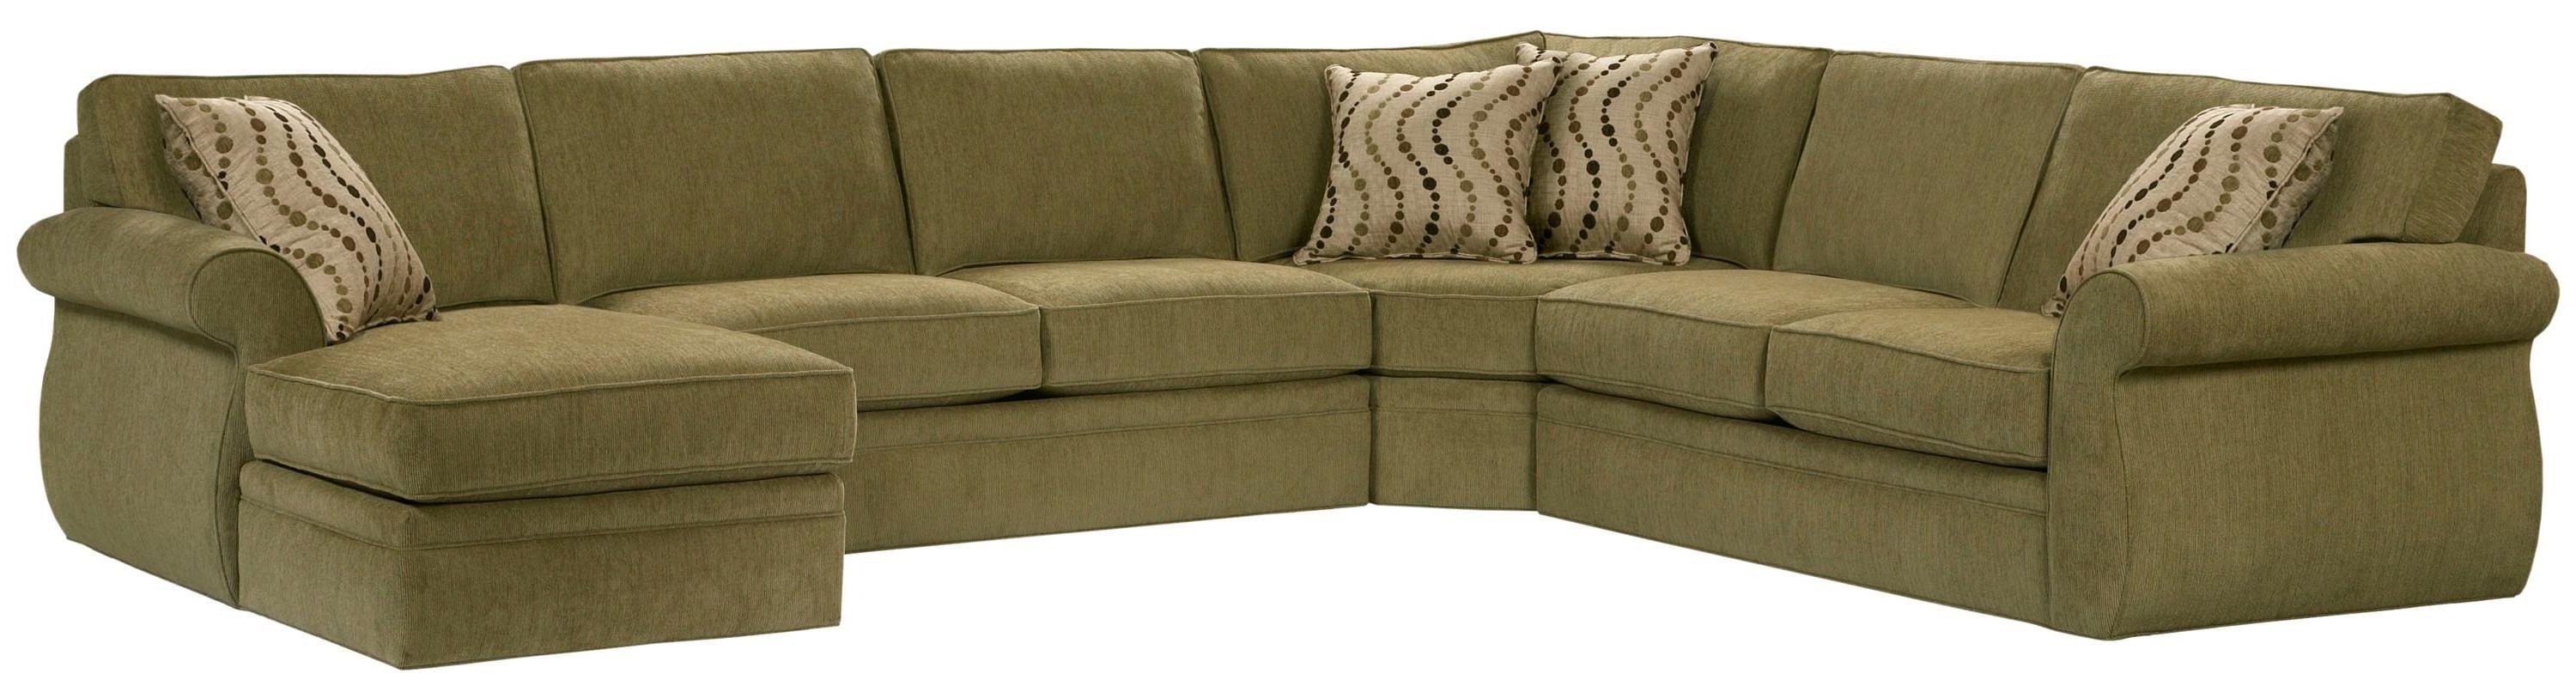 Fashionable Broyhill Furniture Veronica Right Arm Facing Customizable Chaise Pertaining To Broyhill Sectional Sofas (View 1 of 20)